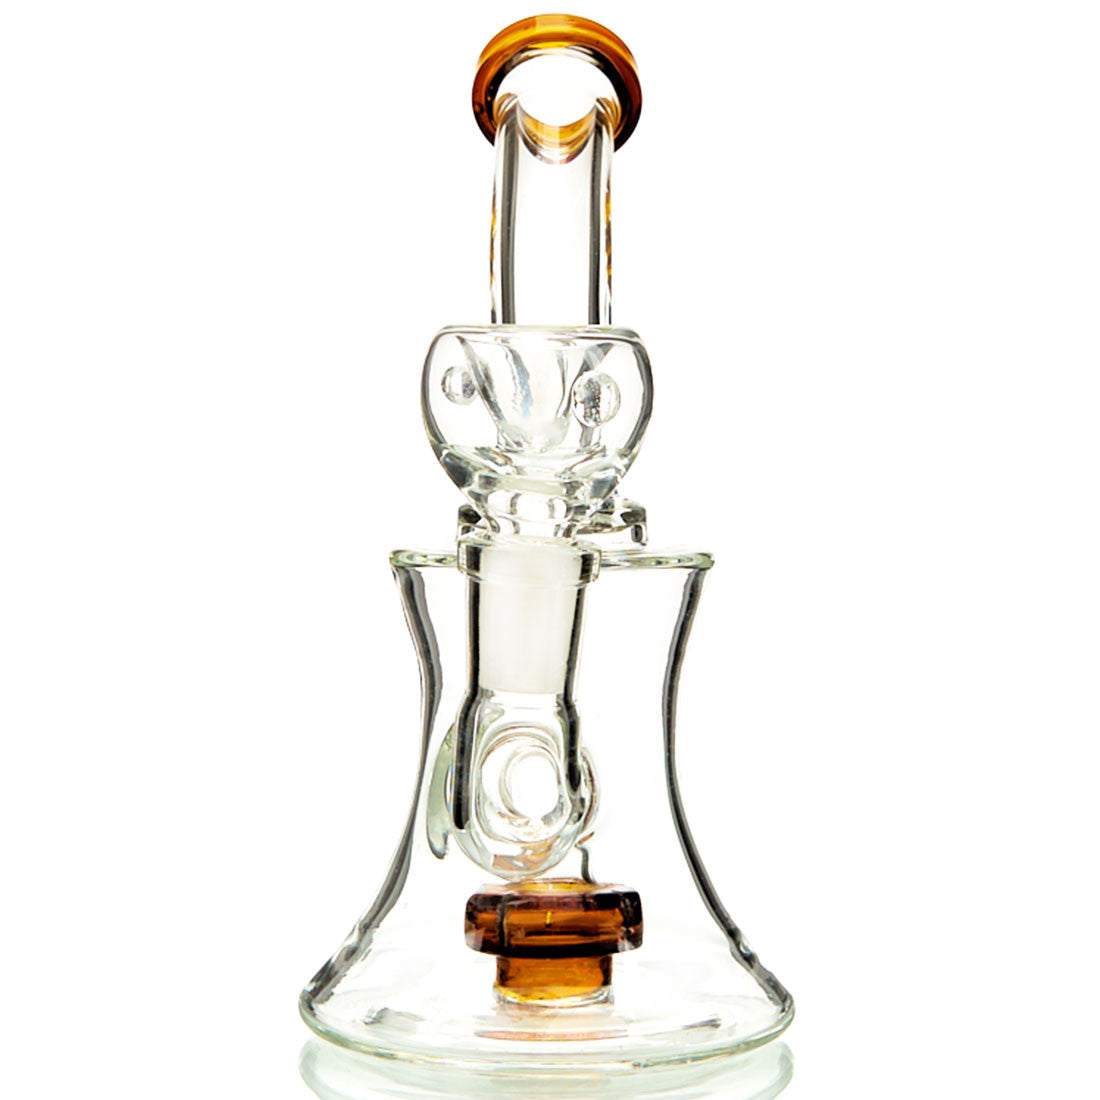 DTHC Glass Small Dab Rig with Showerhead Percolator. Available in a variety of color options.